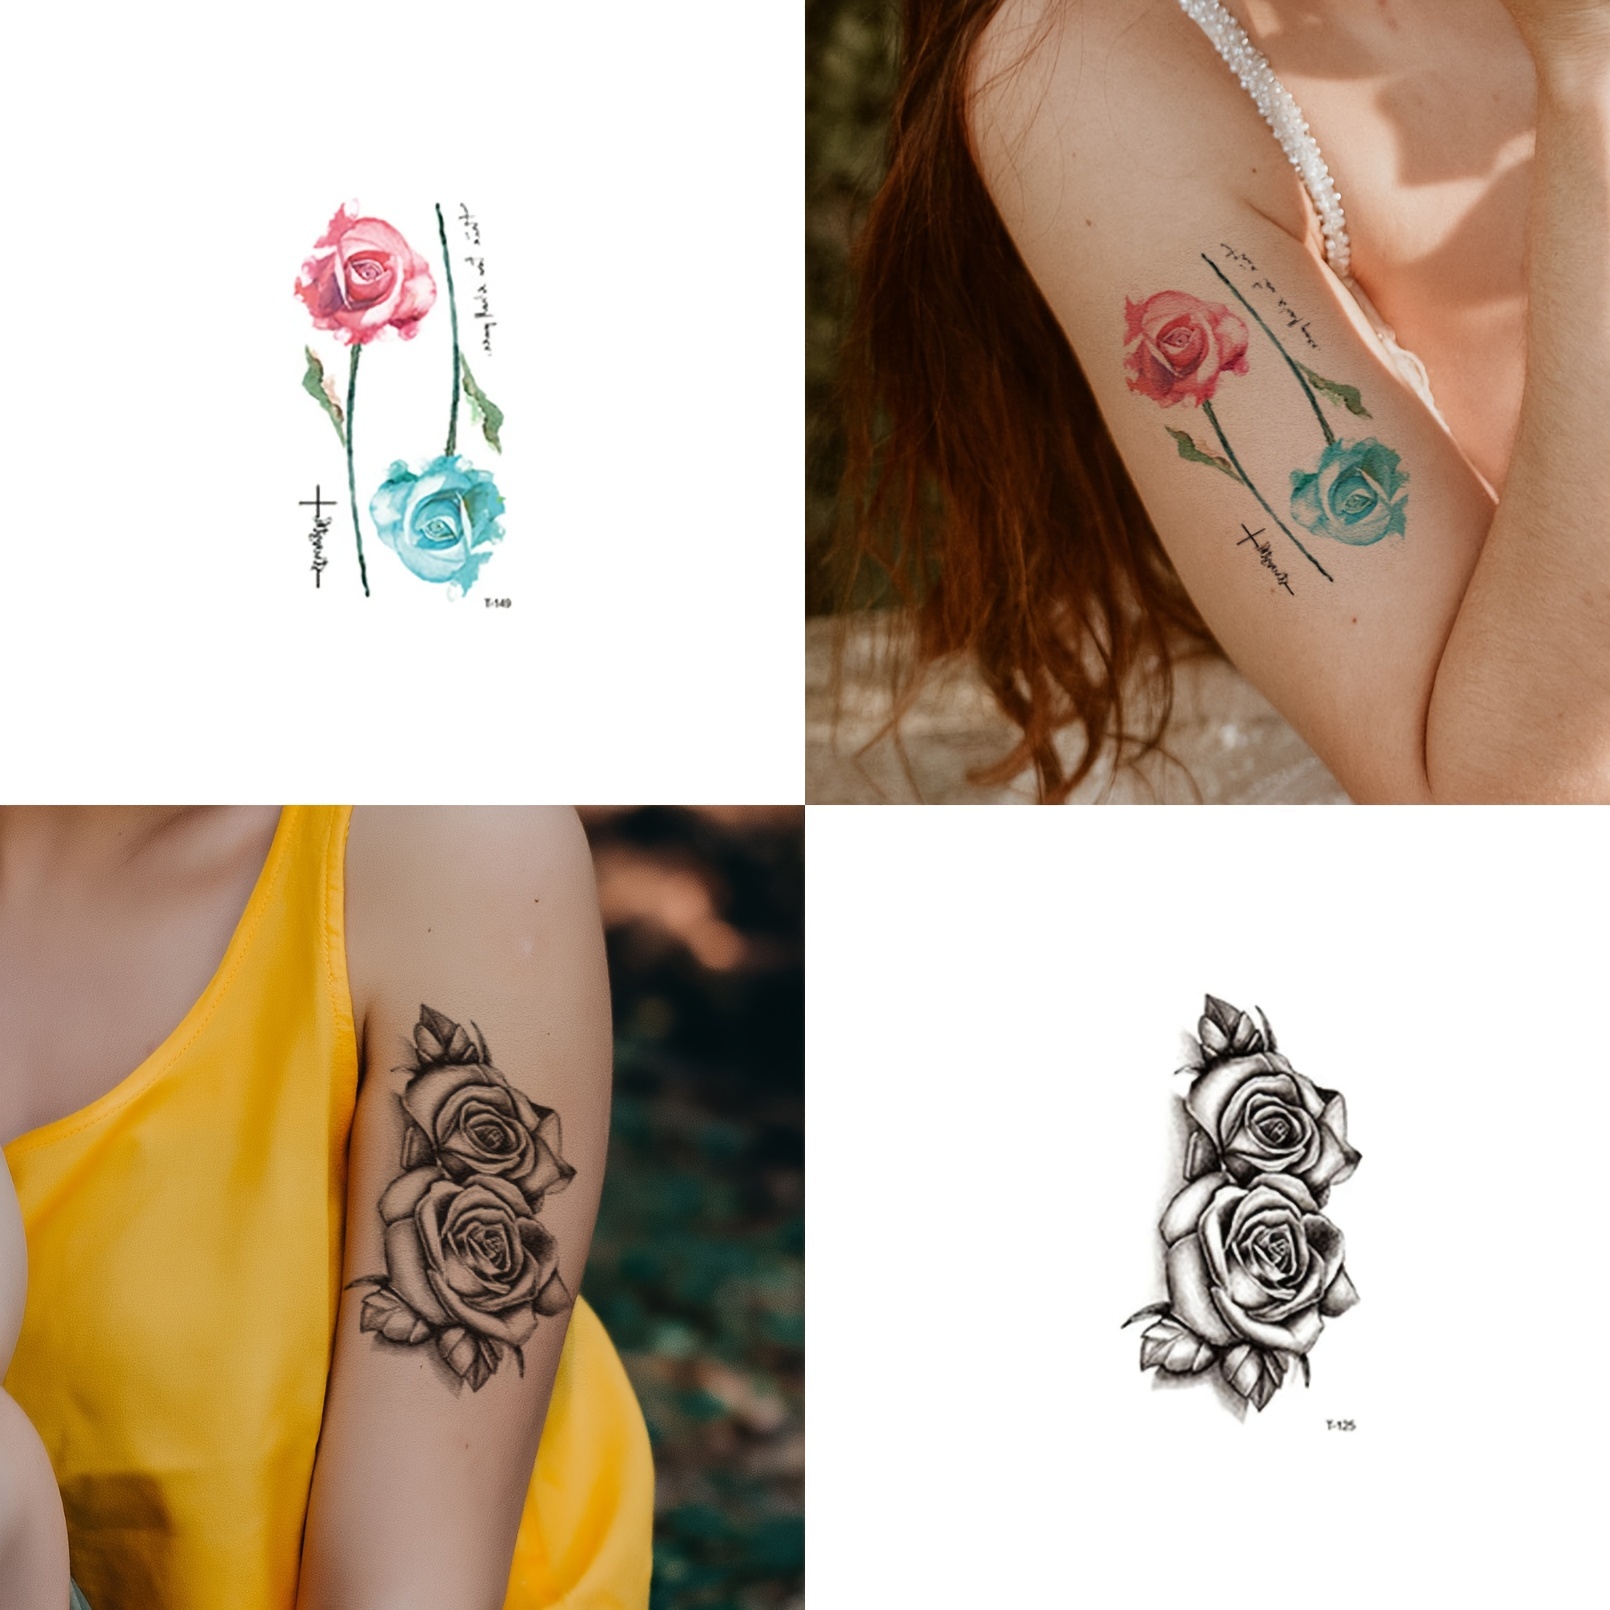 10 Sheets Half Arm Temporary Tattoos - Realistic Tattoo Stickers For Women - Waterproof Fake Tattoos For Neck Arms Hand